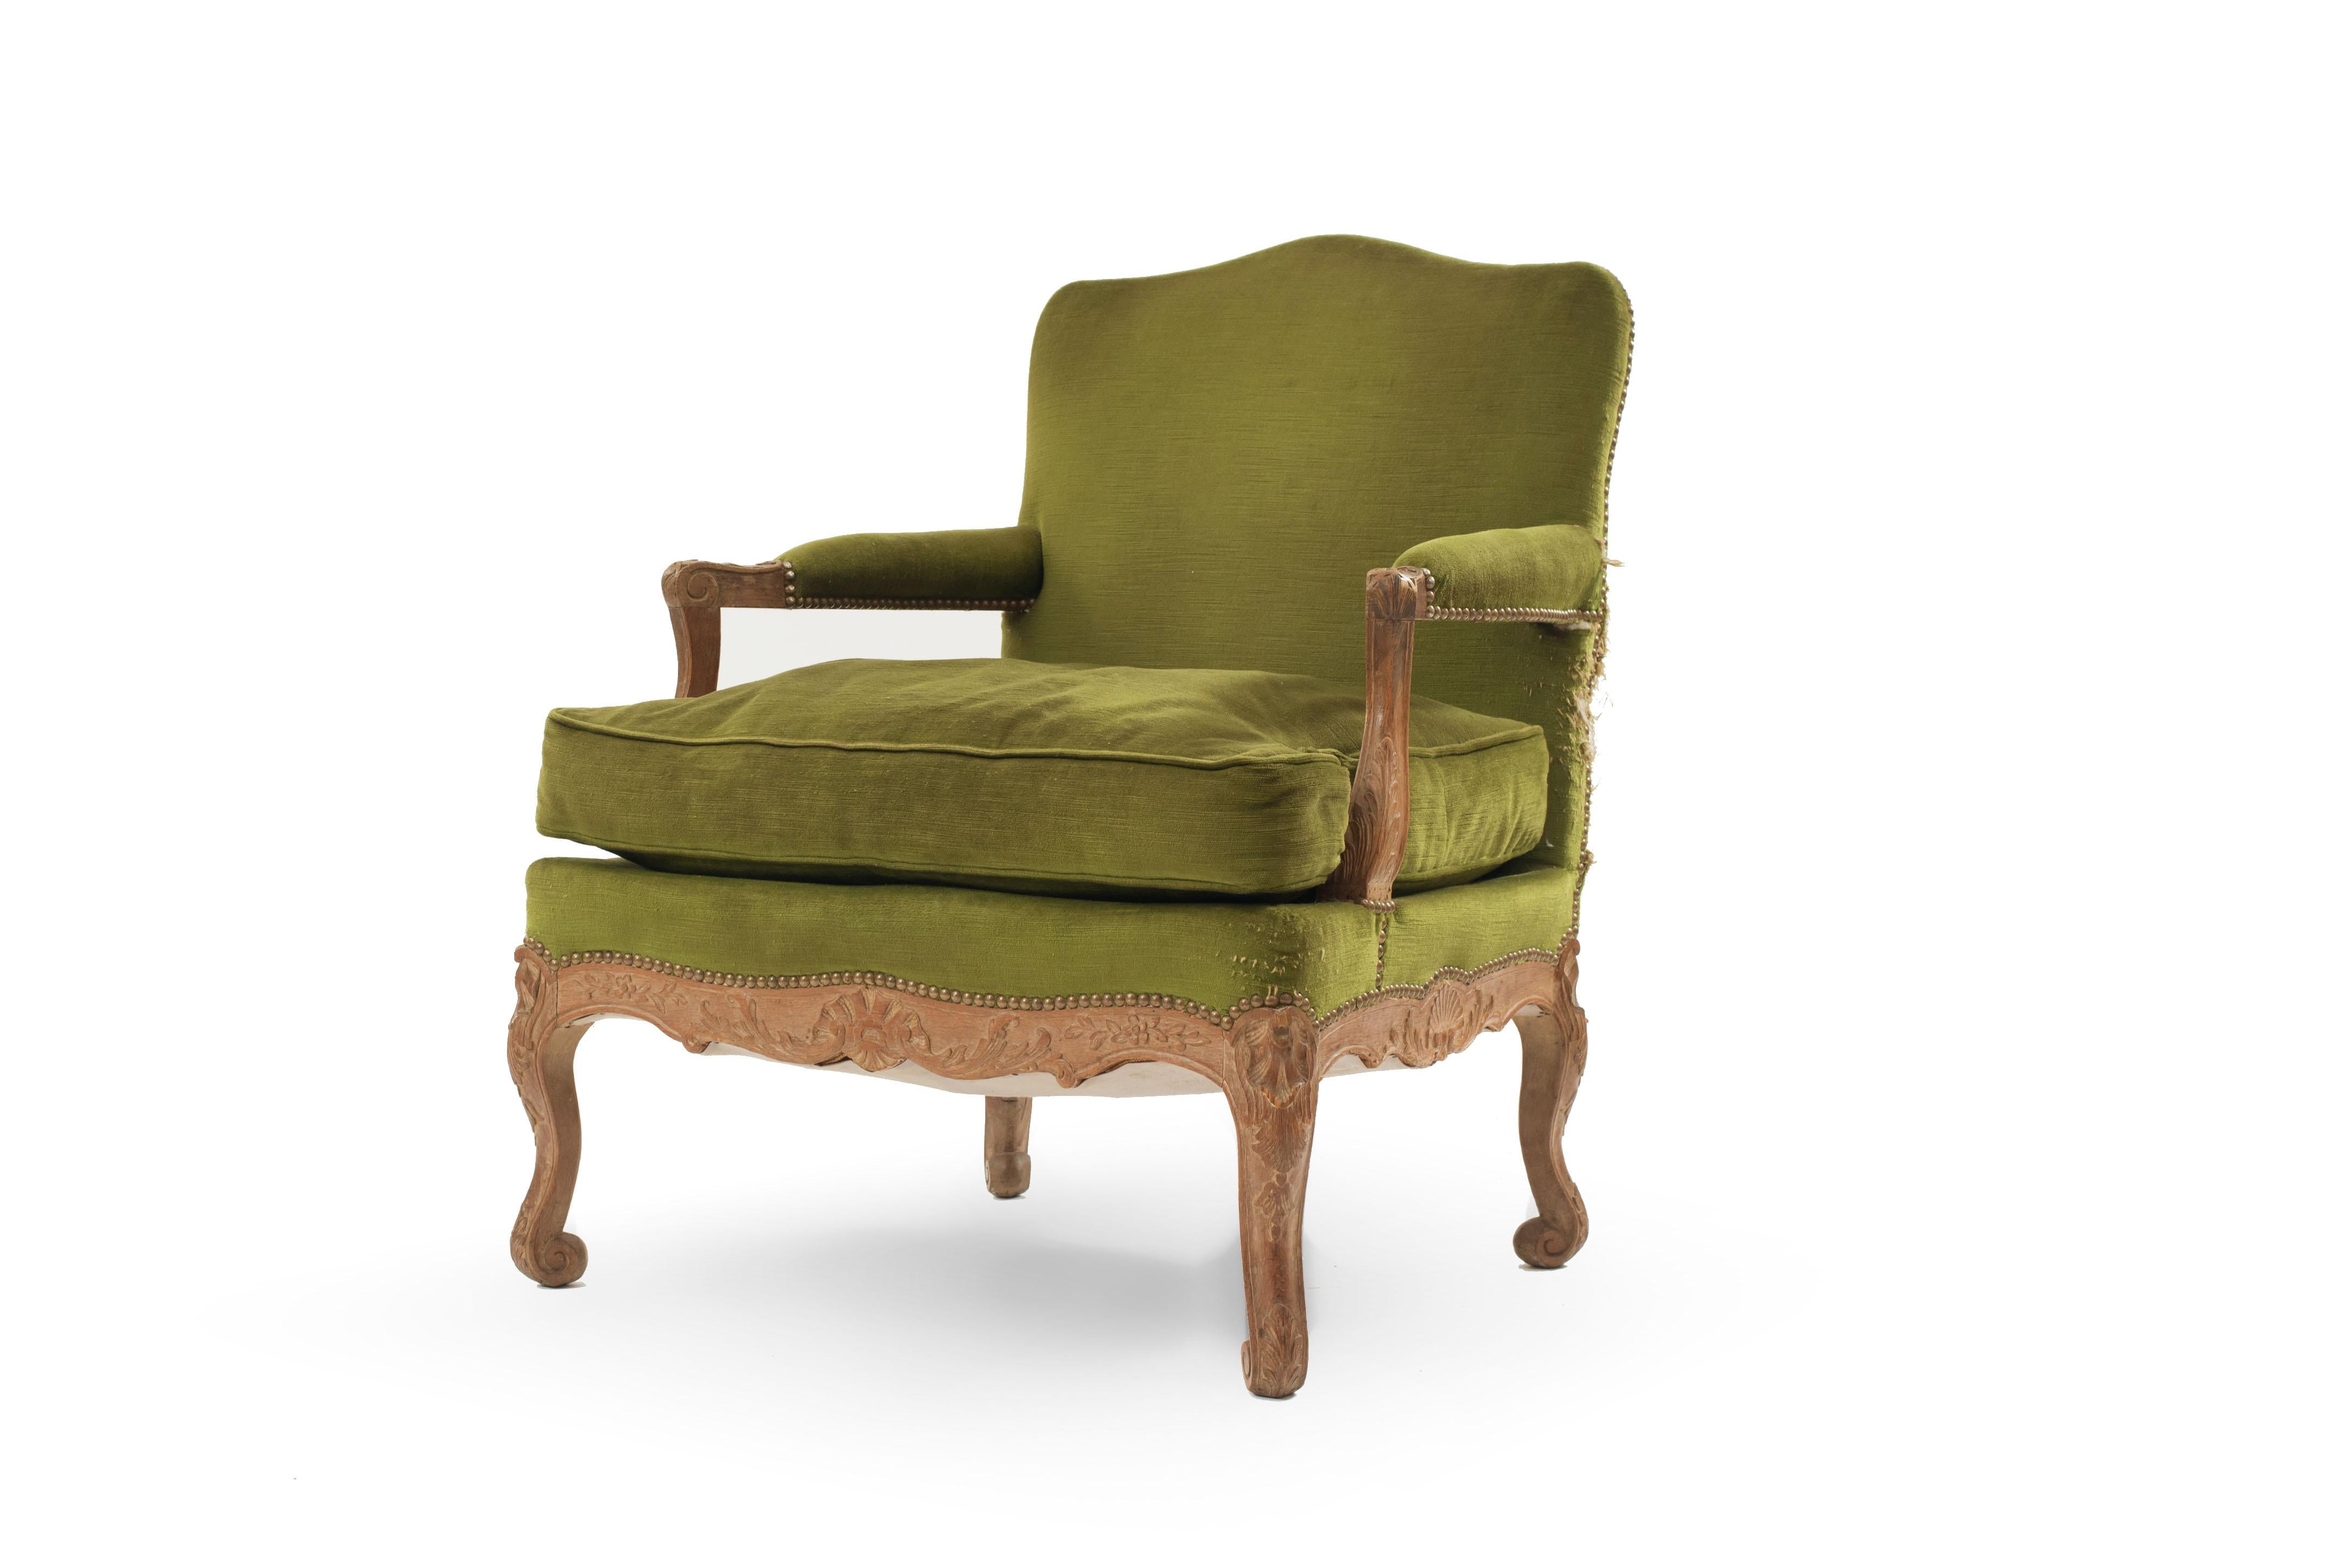 Three-piece French Regence style salon set with carved oak frames and green upholstery having gilt stud detail (Attributed to Maison Gouffé Paris, circa 1940) (settee: 062034B, pair of arms: 062034A)

Measurements:

Settee: Height 36